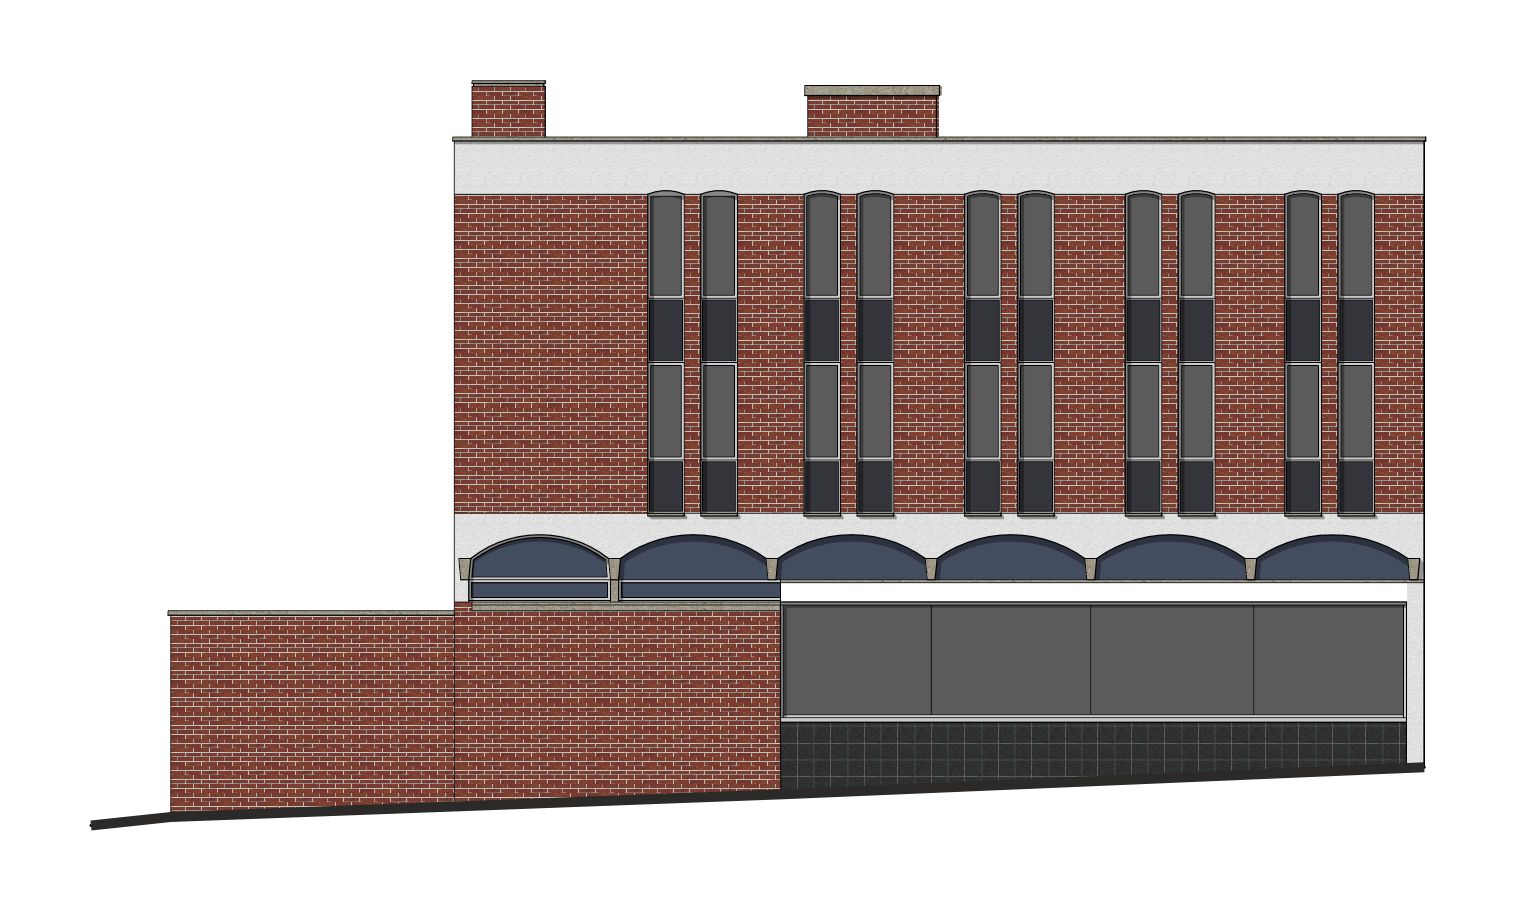 offices converted to flats prior notification existing side drawings swindon planning application